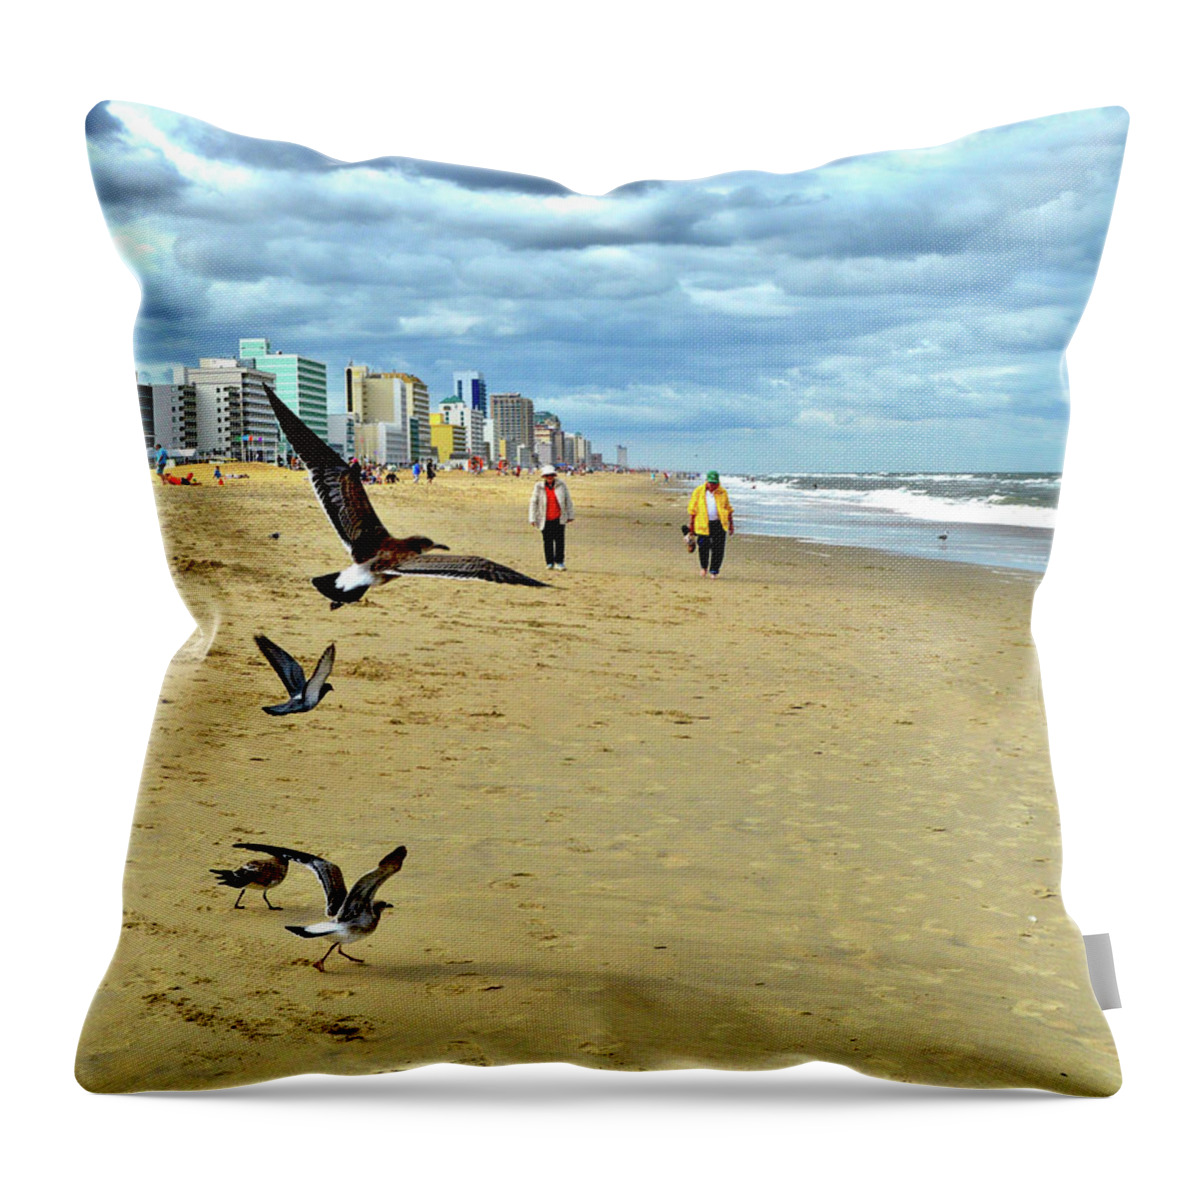 Beach Combers Throw Pillow featuring the photograph Beach Comber Traffic by Susie Loechler